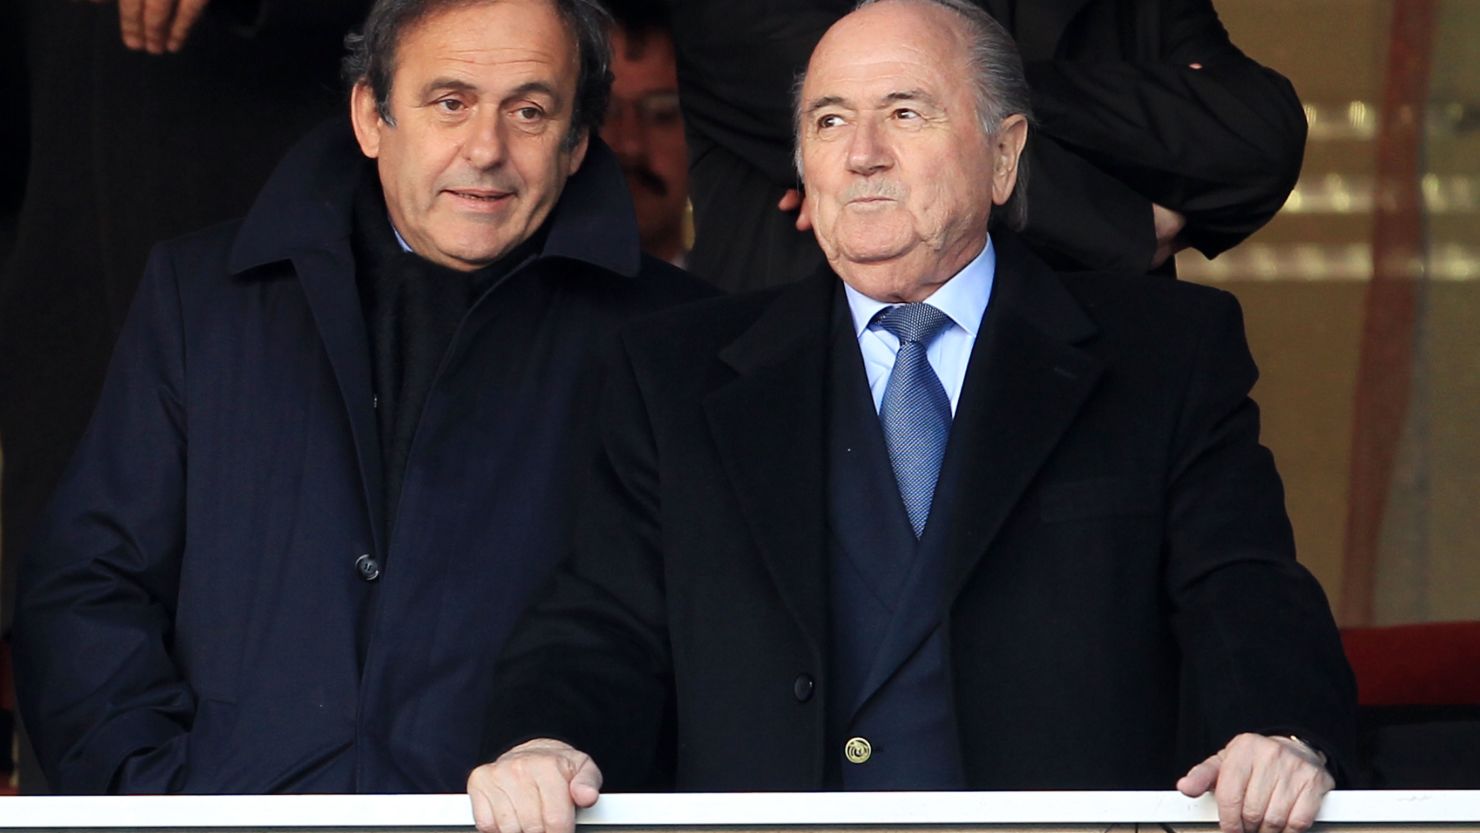 Michel Platini (left) has been head of UEFA since 2007, while Blatter became FIFA president in 1998.